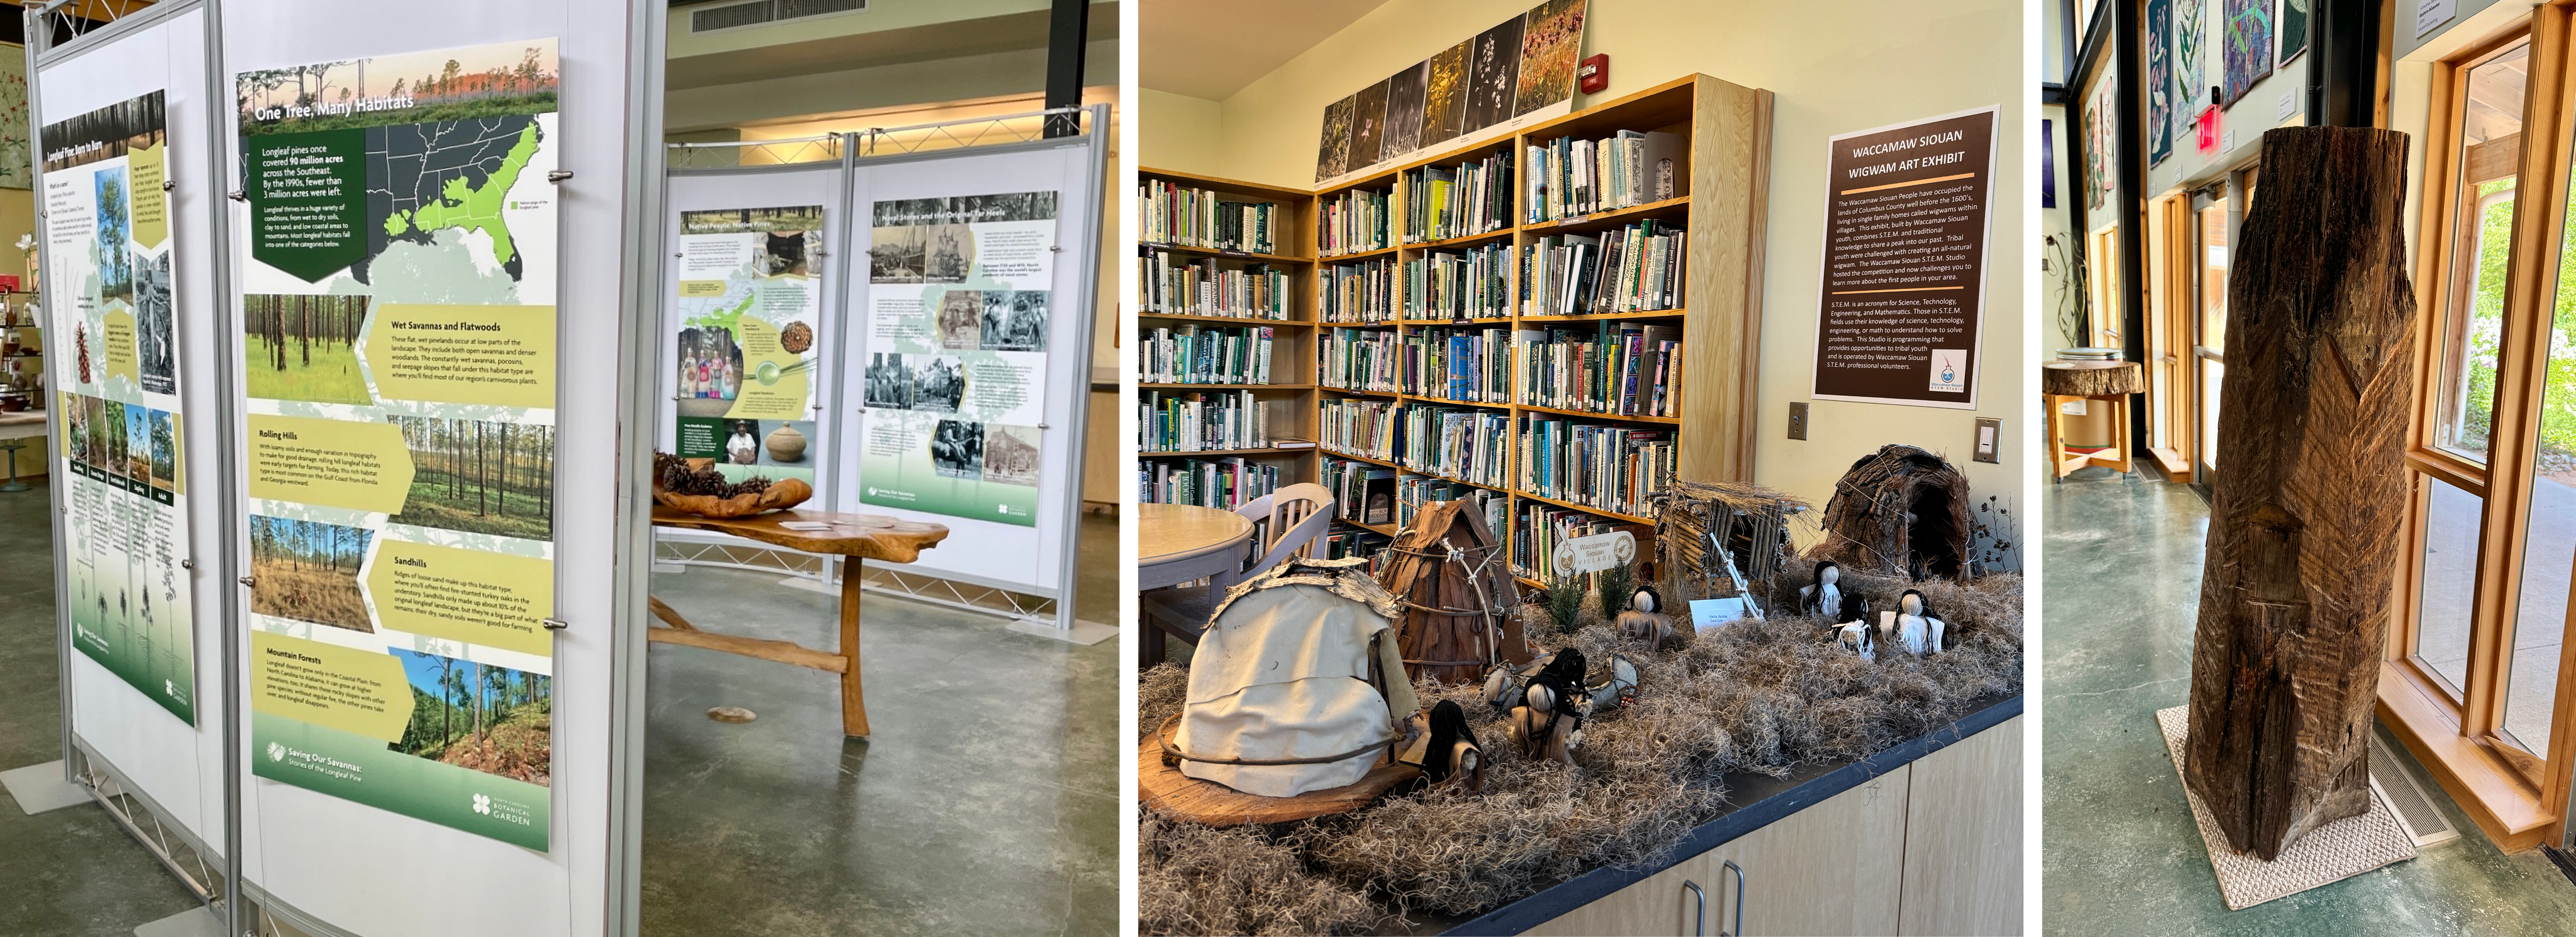 tiled graphic with a photo of the educational exhibit panels, a photo of the wigwam exhibit set up on the library counter, and a photo of the turpentined longleaf pine stump